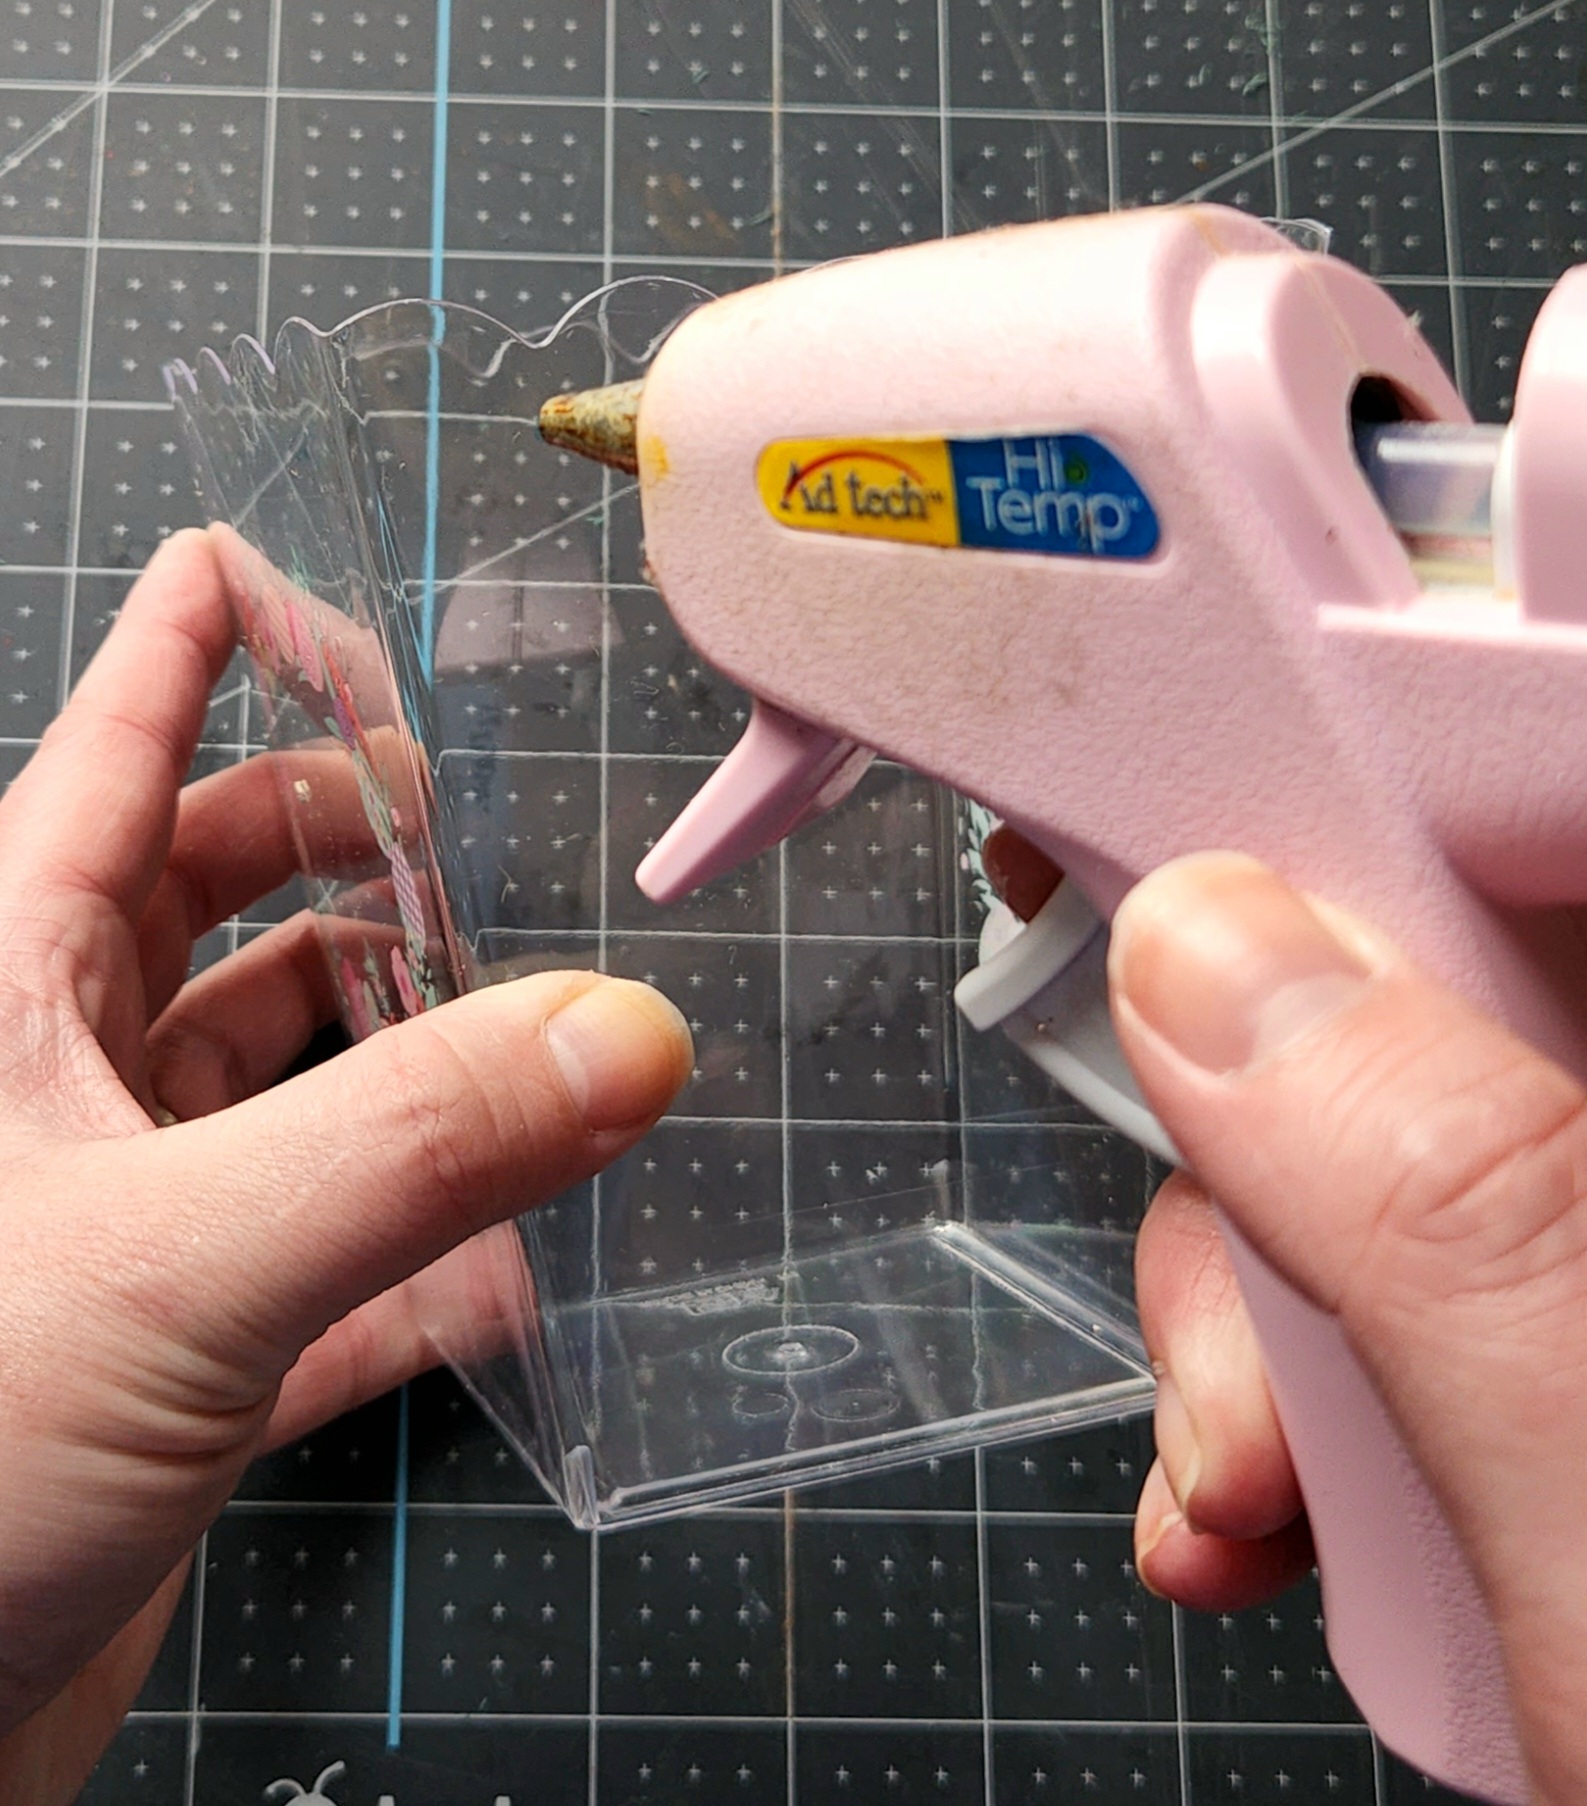 Pressing the hot glue gun through the clear vase to put a hole in it to hang on the door hanger.